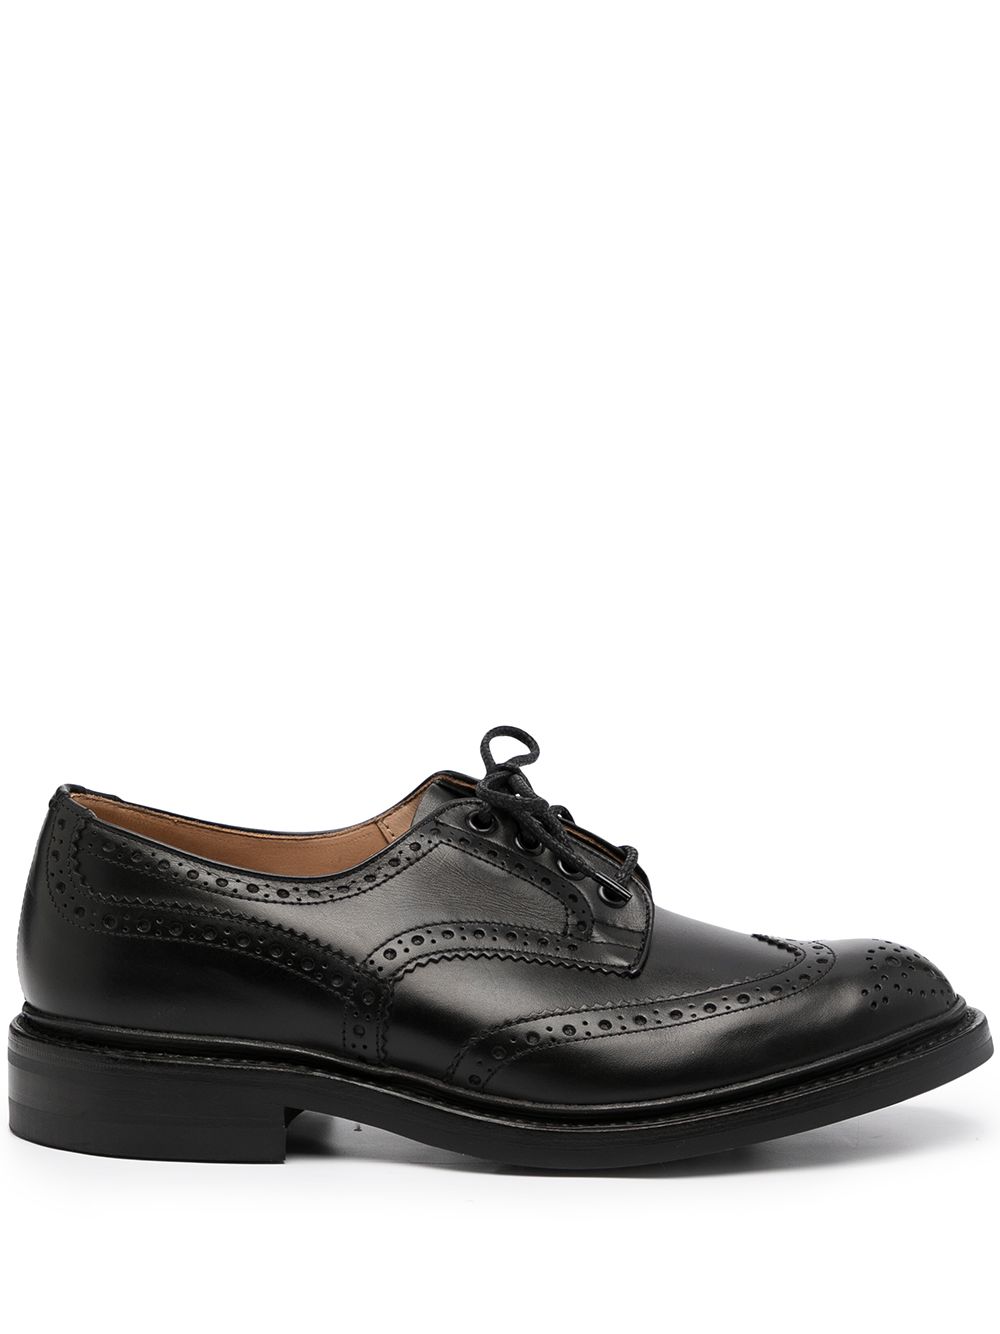 Shop Tricker's Bourton Leather Wingtip Brogue with Express Delivery ...